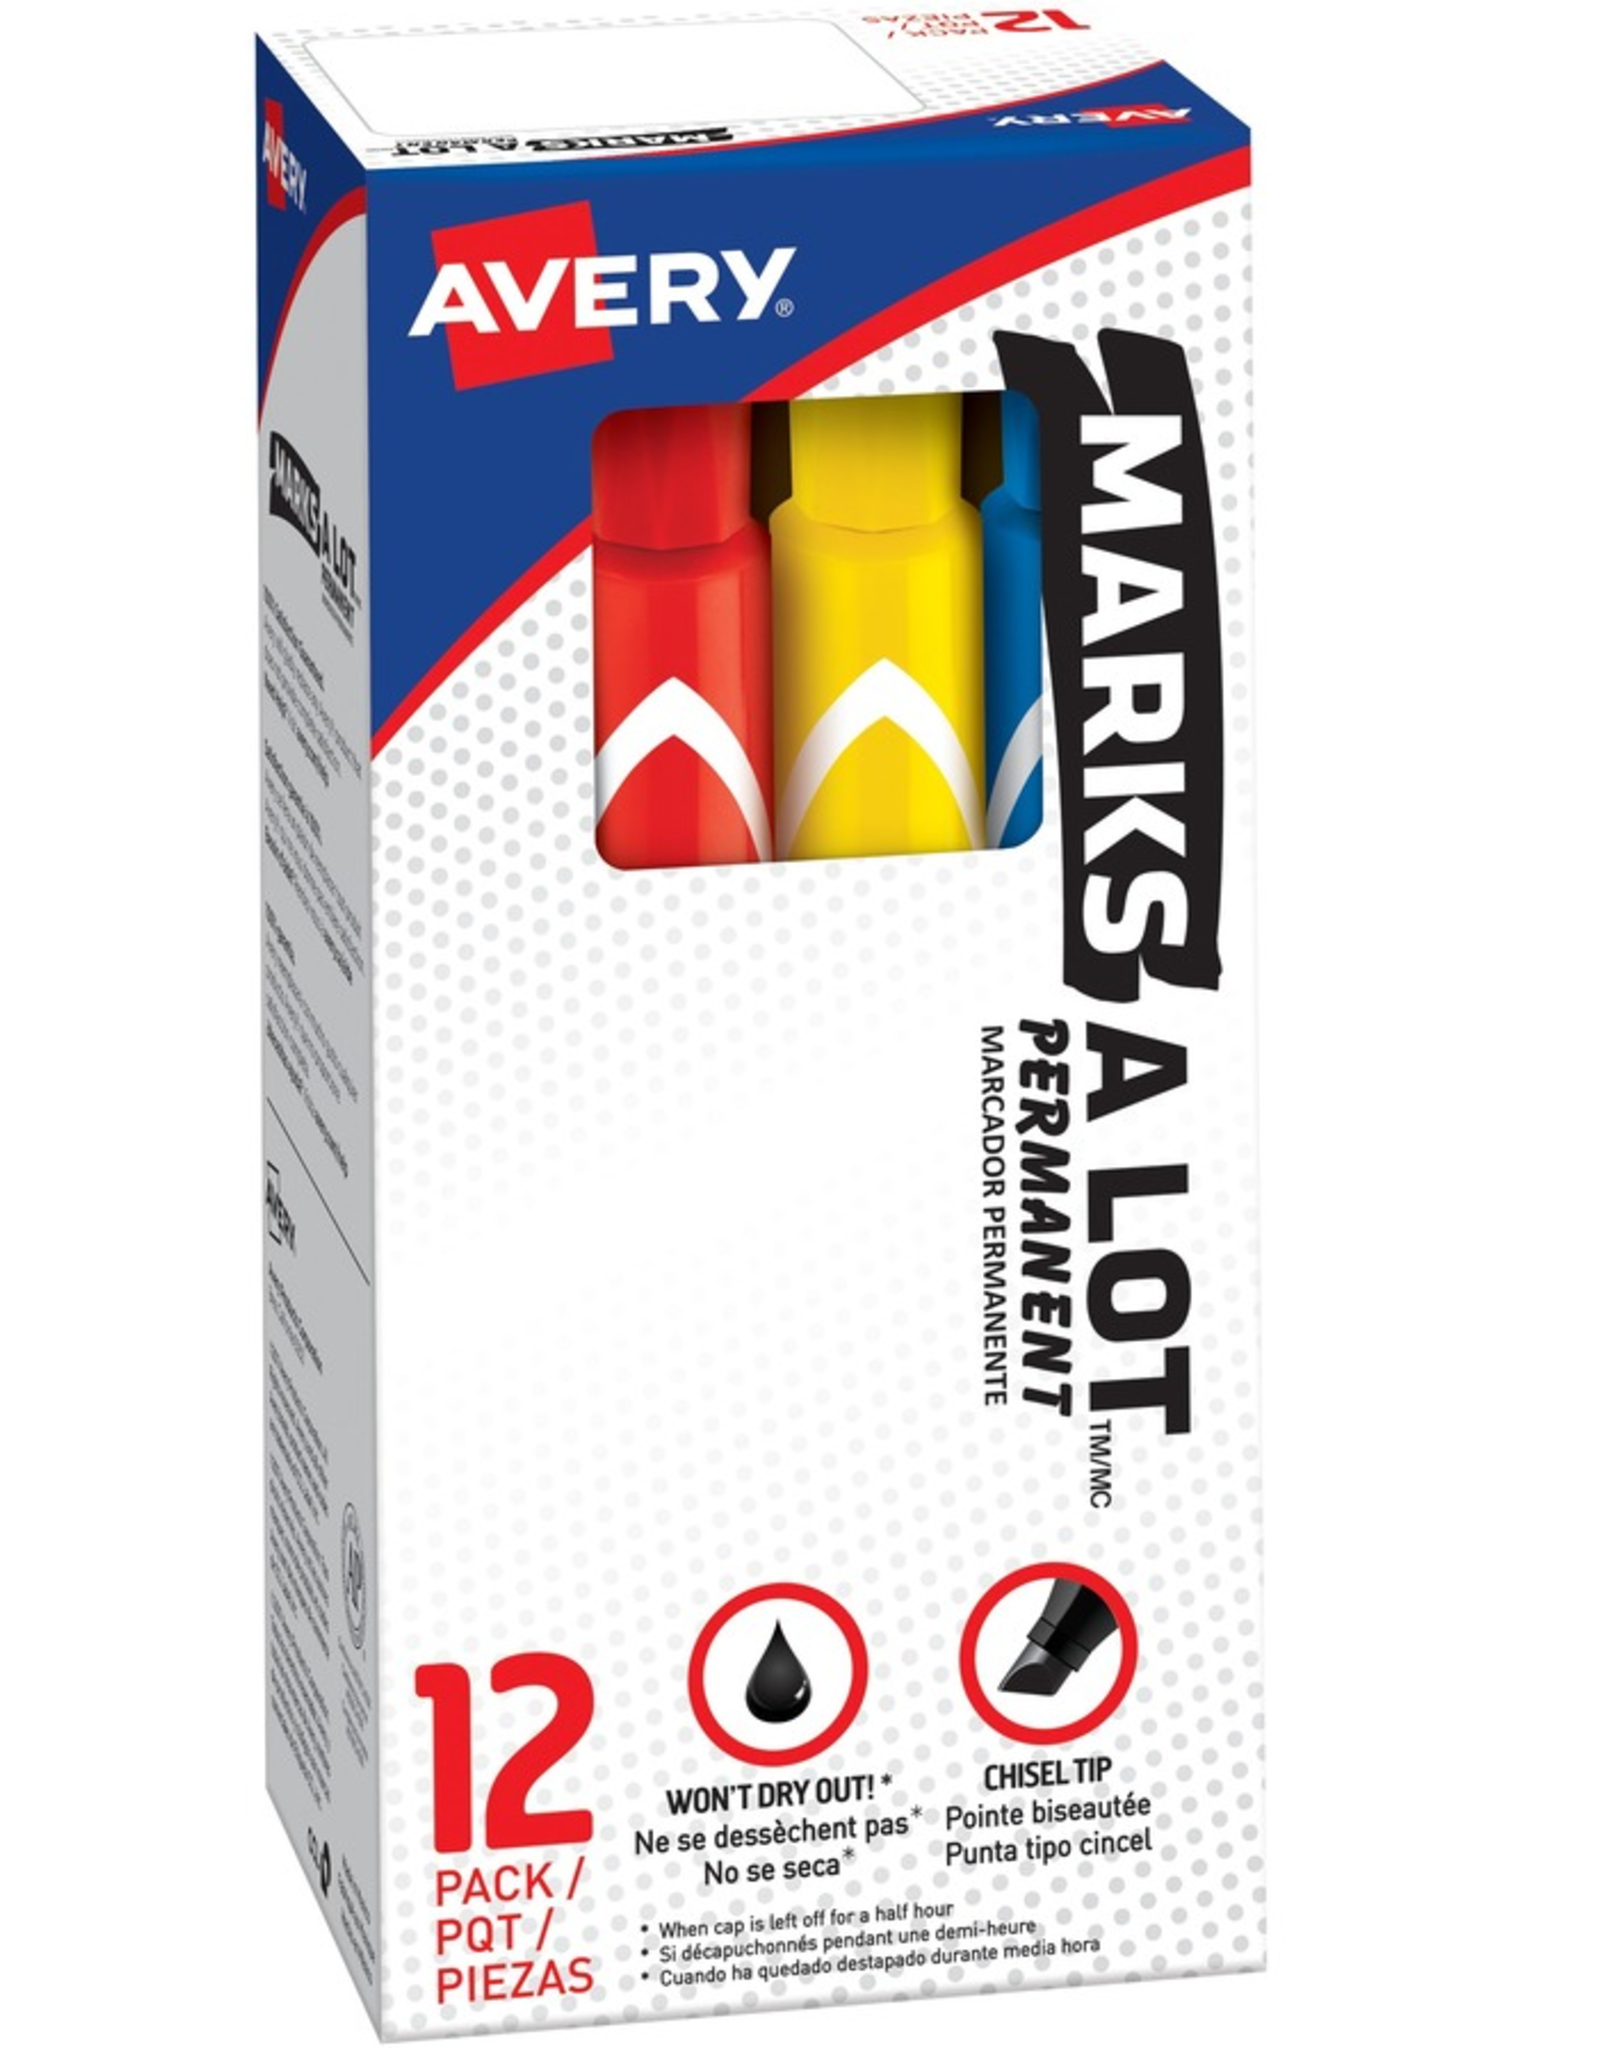 Avery MARKER MARKS-A-LOT ASSORTED COLORS - 12 PACK